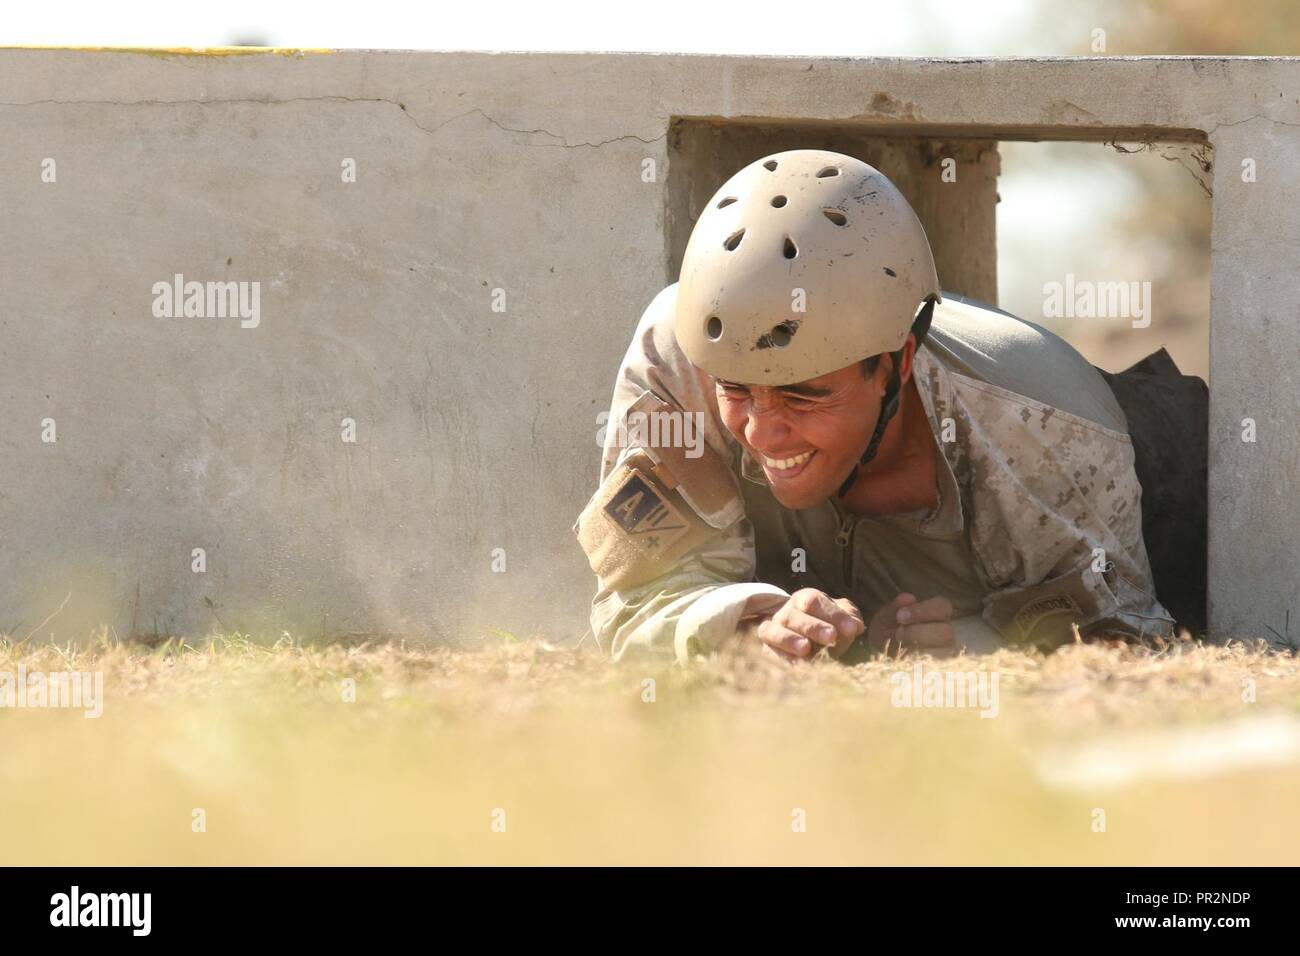 A Chilean competitor crawls through an obstacle July 24, 2017, during Fuerzas Comando in Vista Alegre, Paraguay. Throughout Fuerzas Comando, competitors' physical limits and marksmanship expertise are tested in hopes to increase their tactical skills. Stock Photo